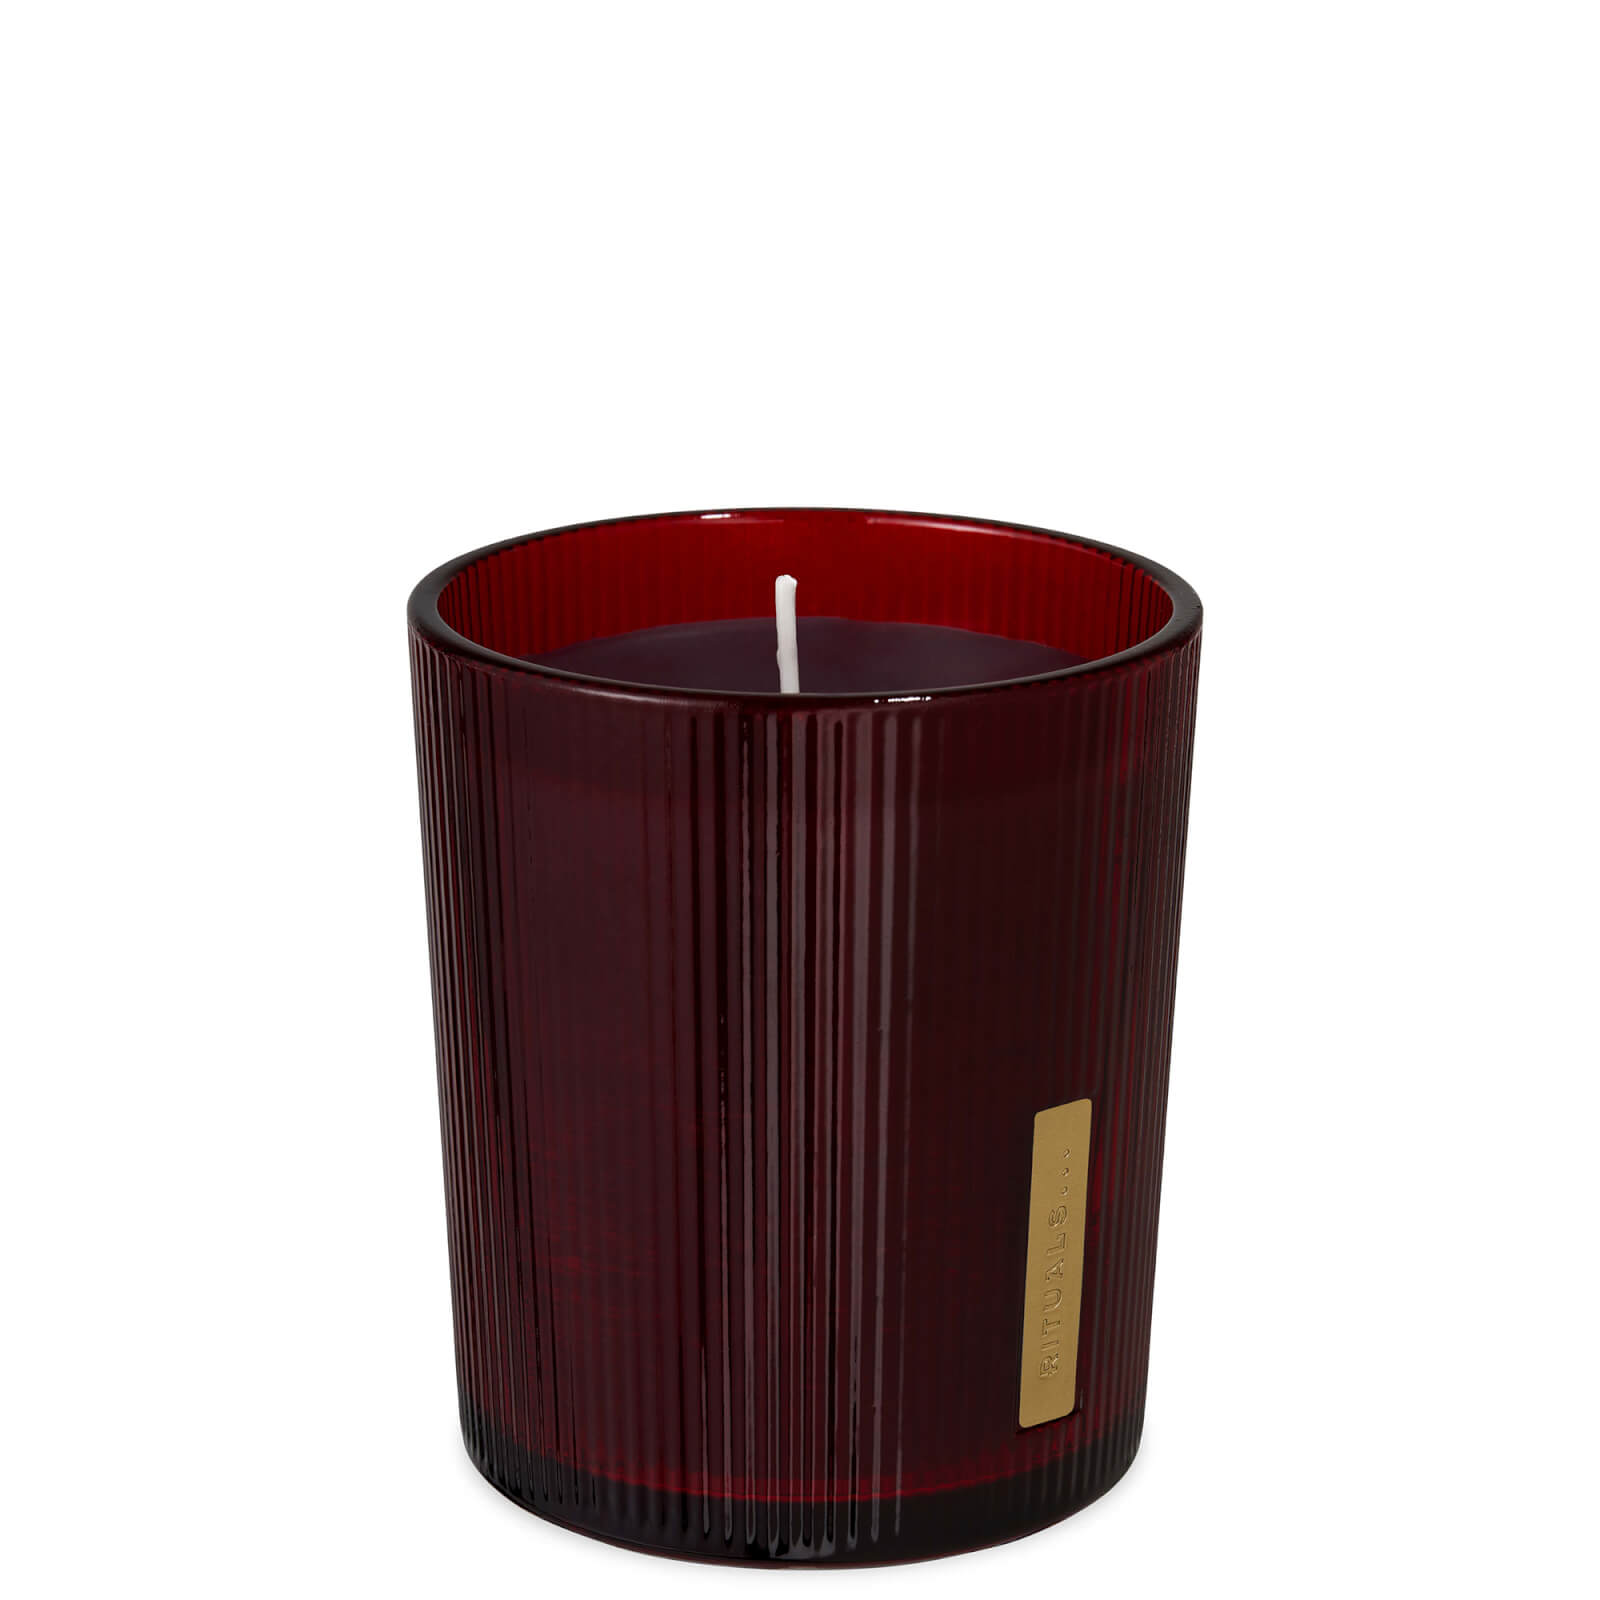 Rituals The Ritual Of Ayurveda Scented Candle 290g